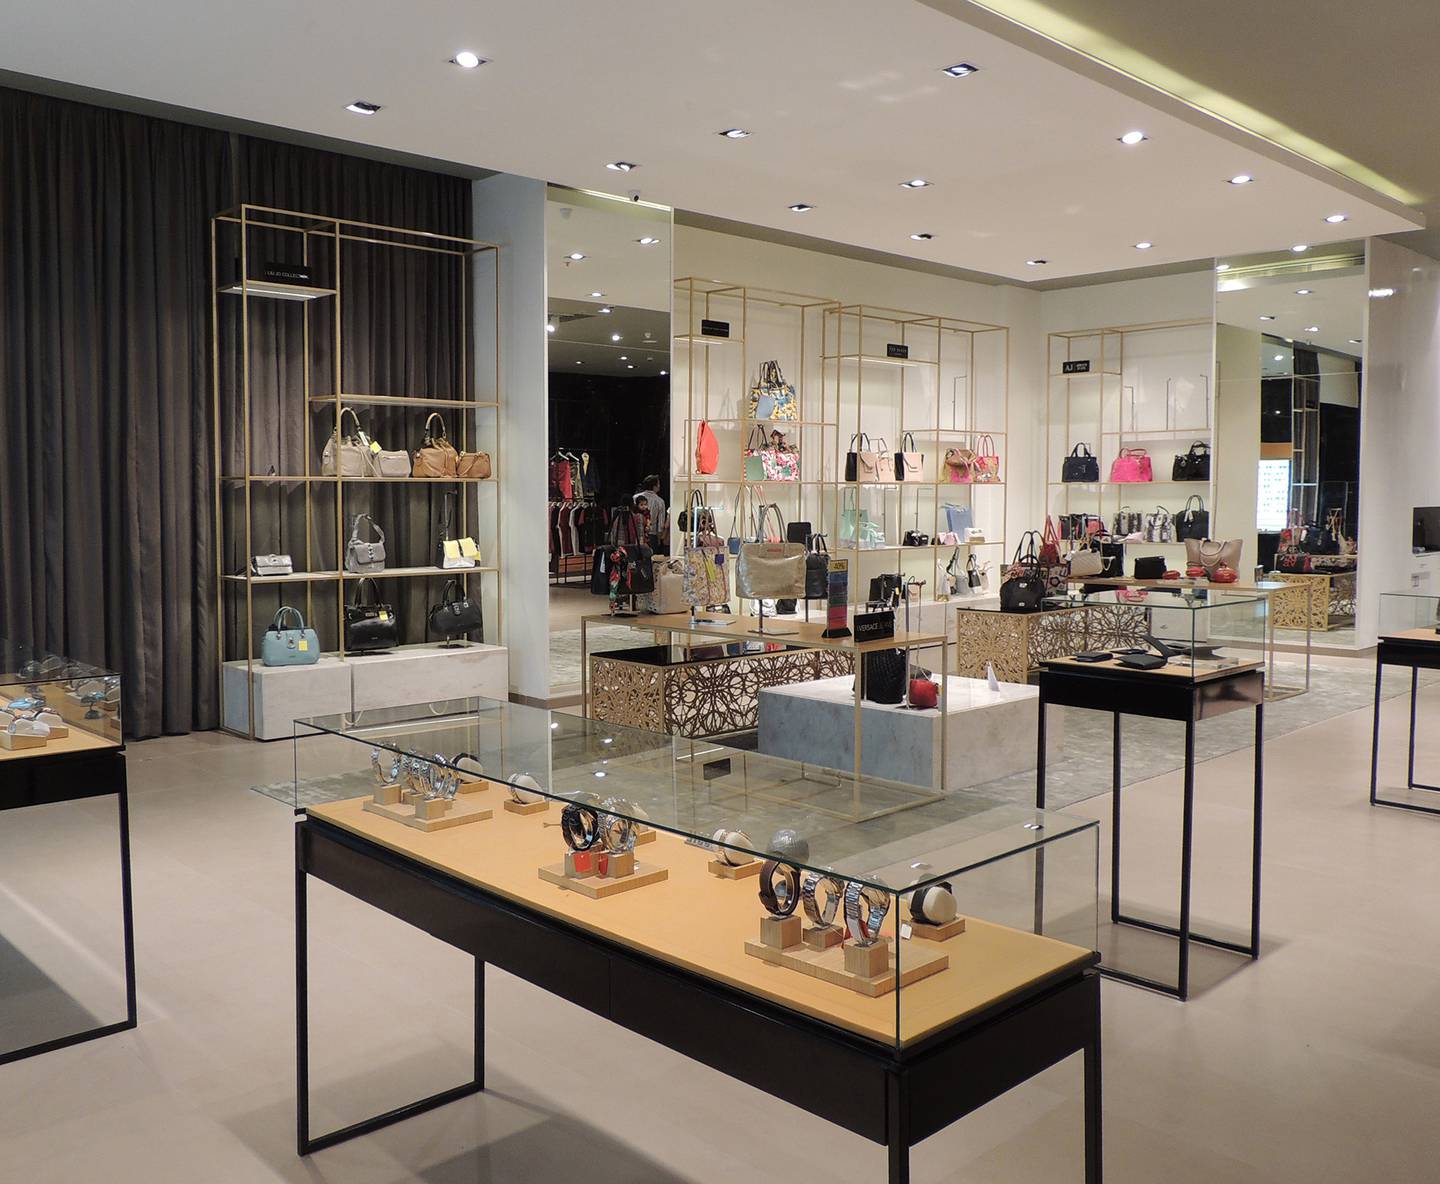 The Collective an Indian multi-brand retail chain owned Aditya Birla Fashion and Retail Ltd which sells labels like Ferragamo and Emporio Armani.